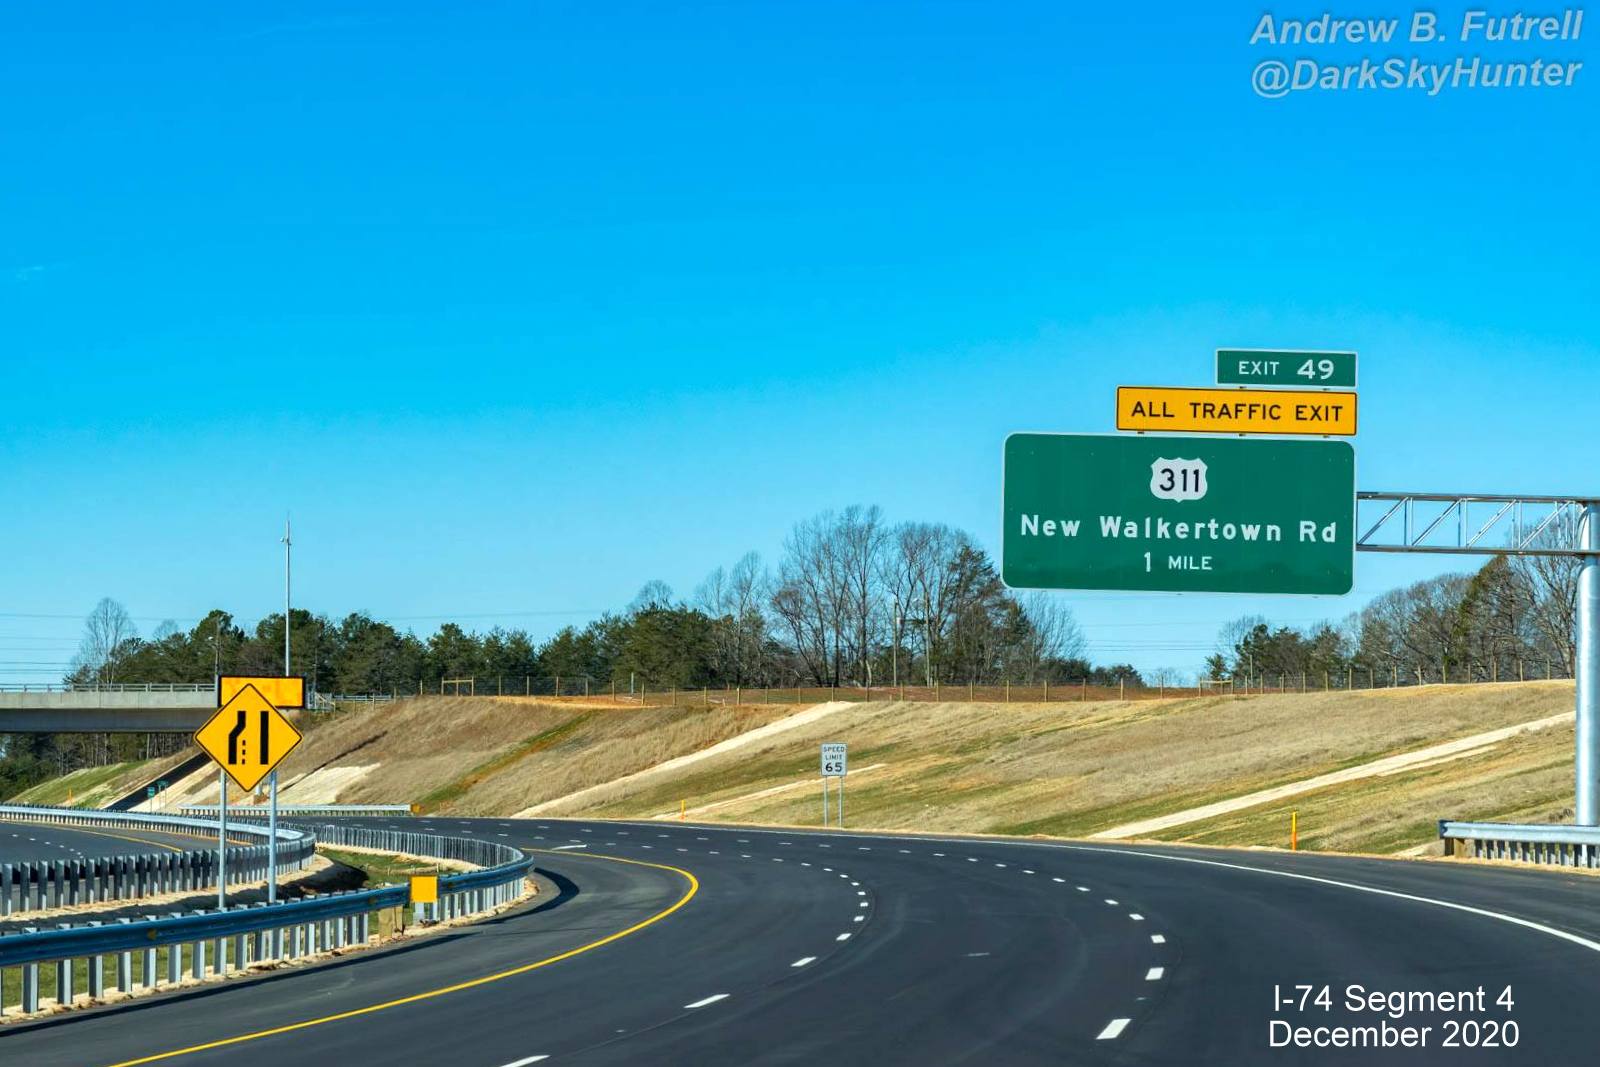 Image of 1-Mile advance sign for US 311 exit on newly opened section of NC 74 (Future I-74) West Winston-Salem Northern 
        Beltway, by Andrew F. Futrell, December 2020